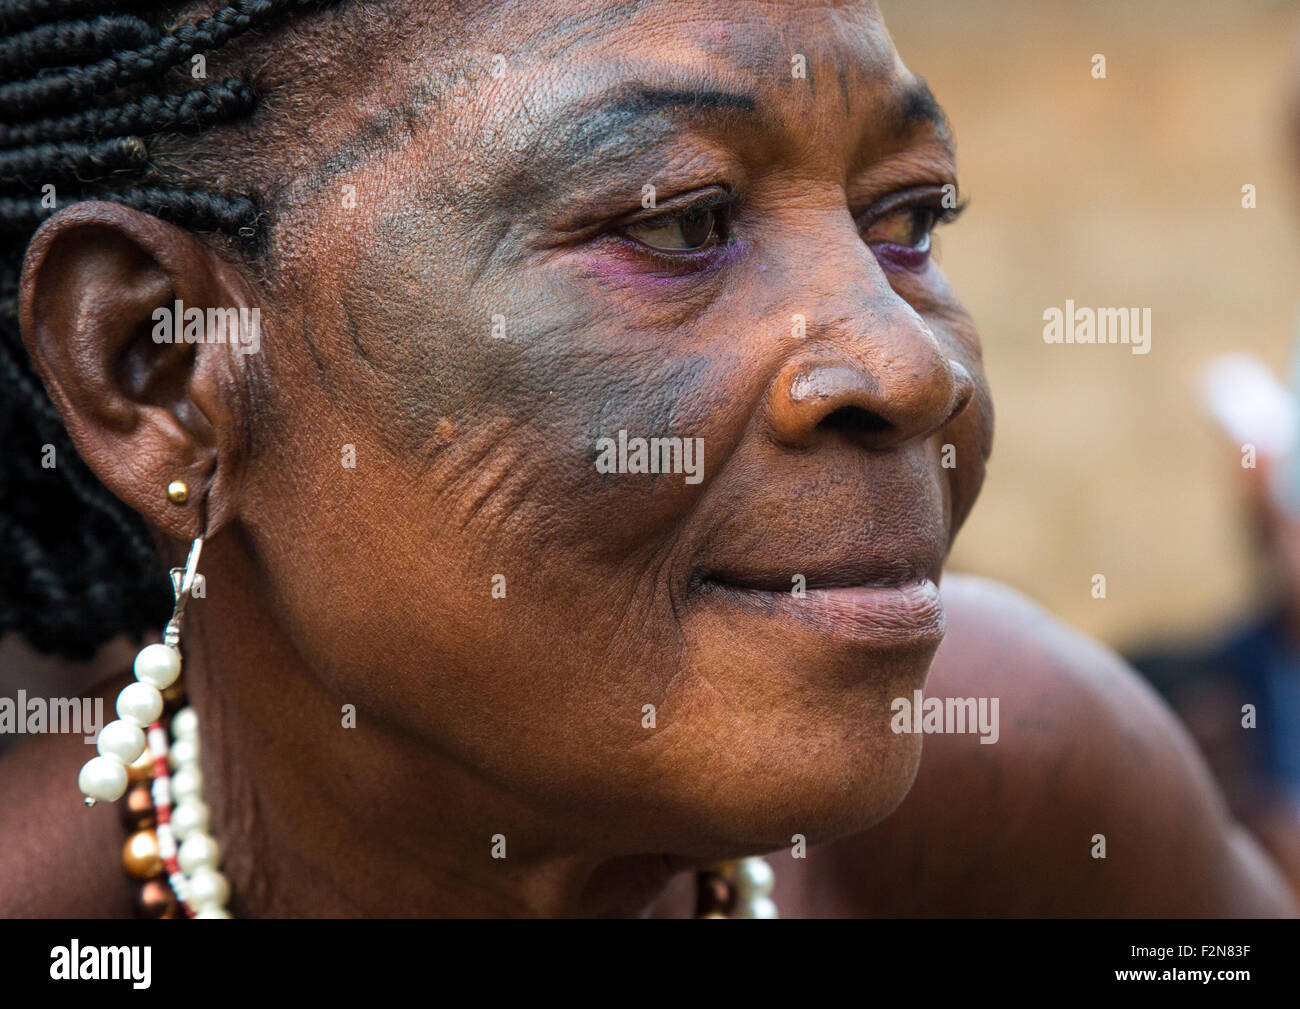 Benin, West Africa, Bopa, voodoo priestess with tattooed face during a ceremony Stock Photo